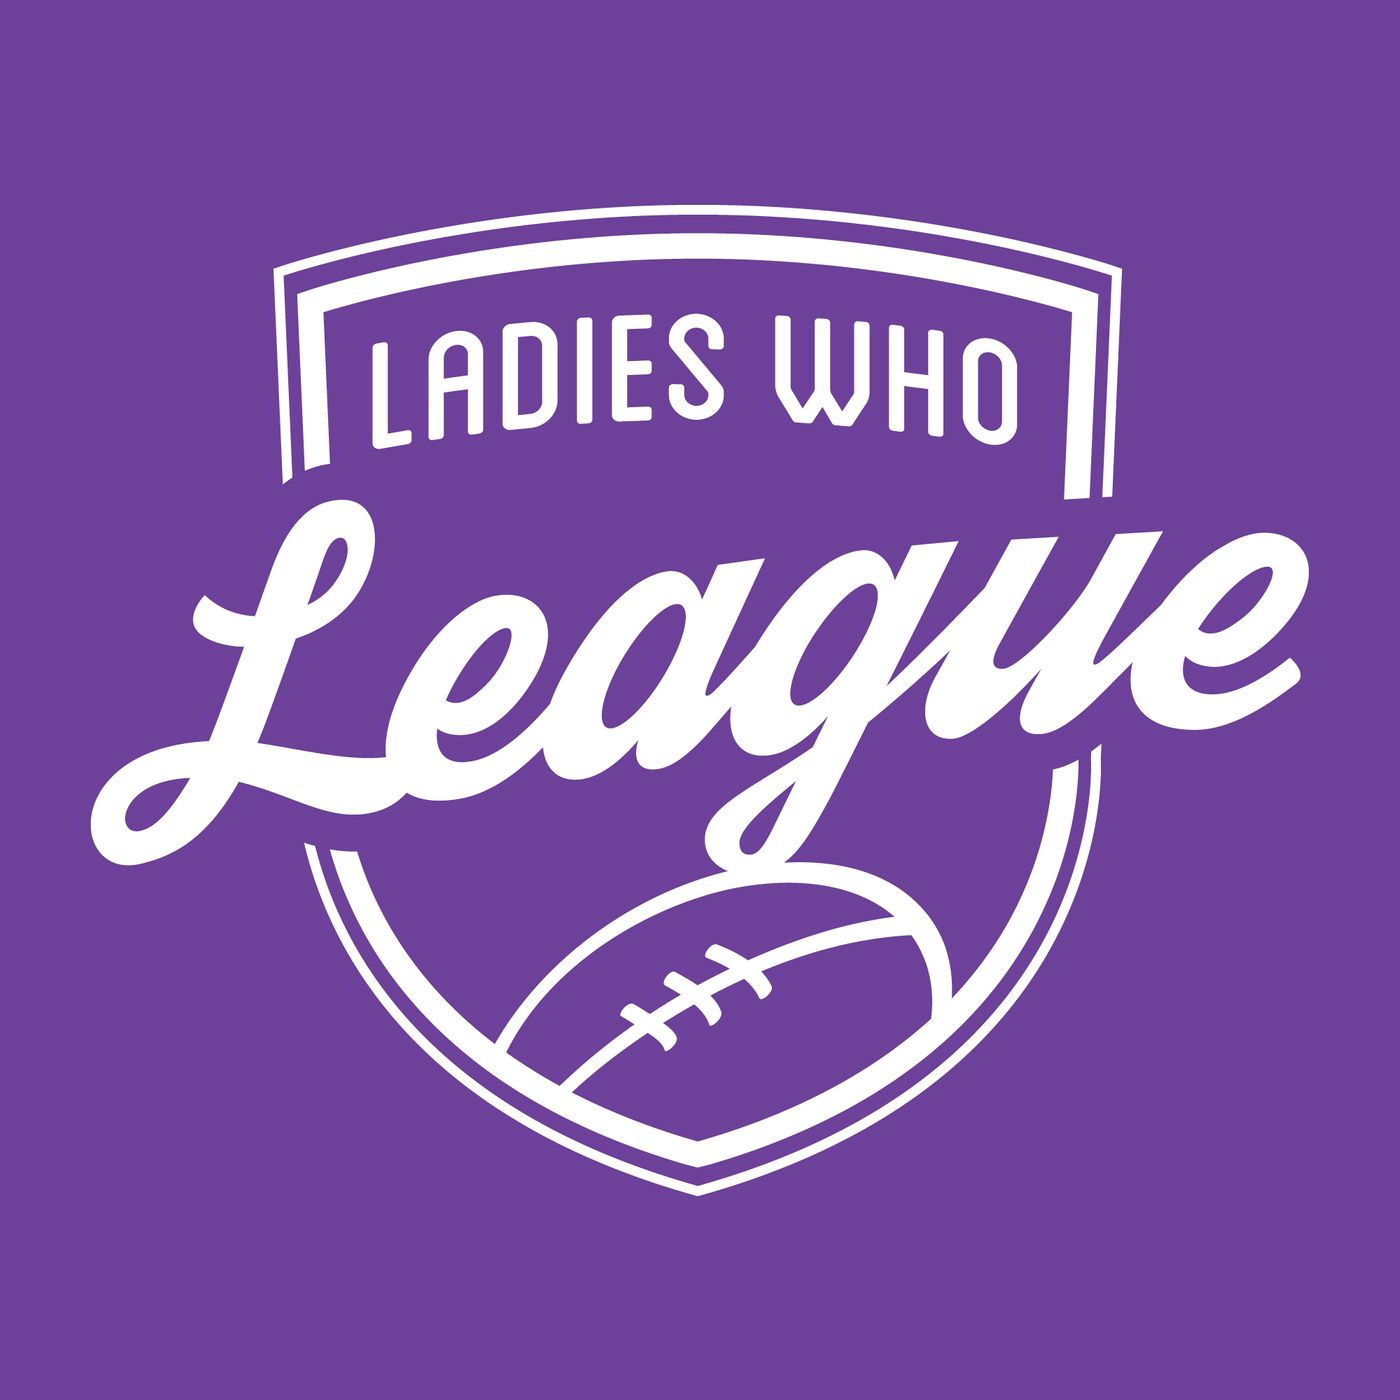 Ladies who League (Old Feed)